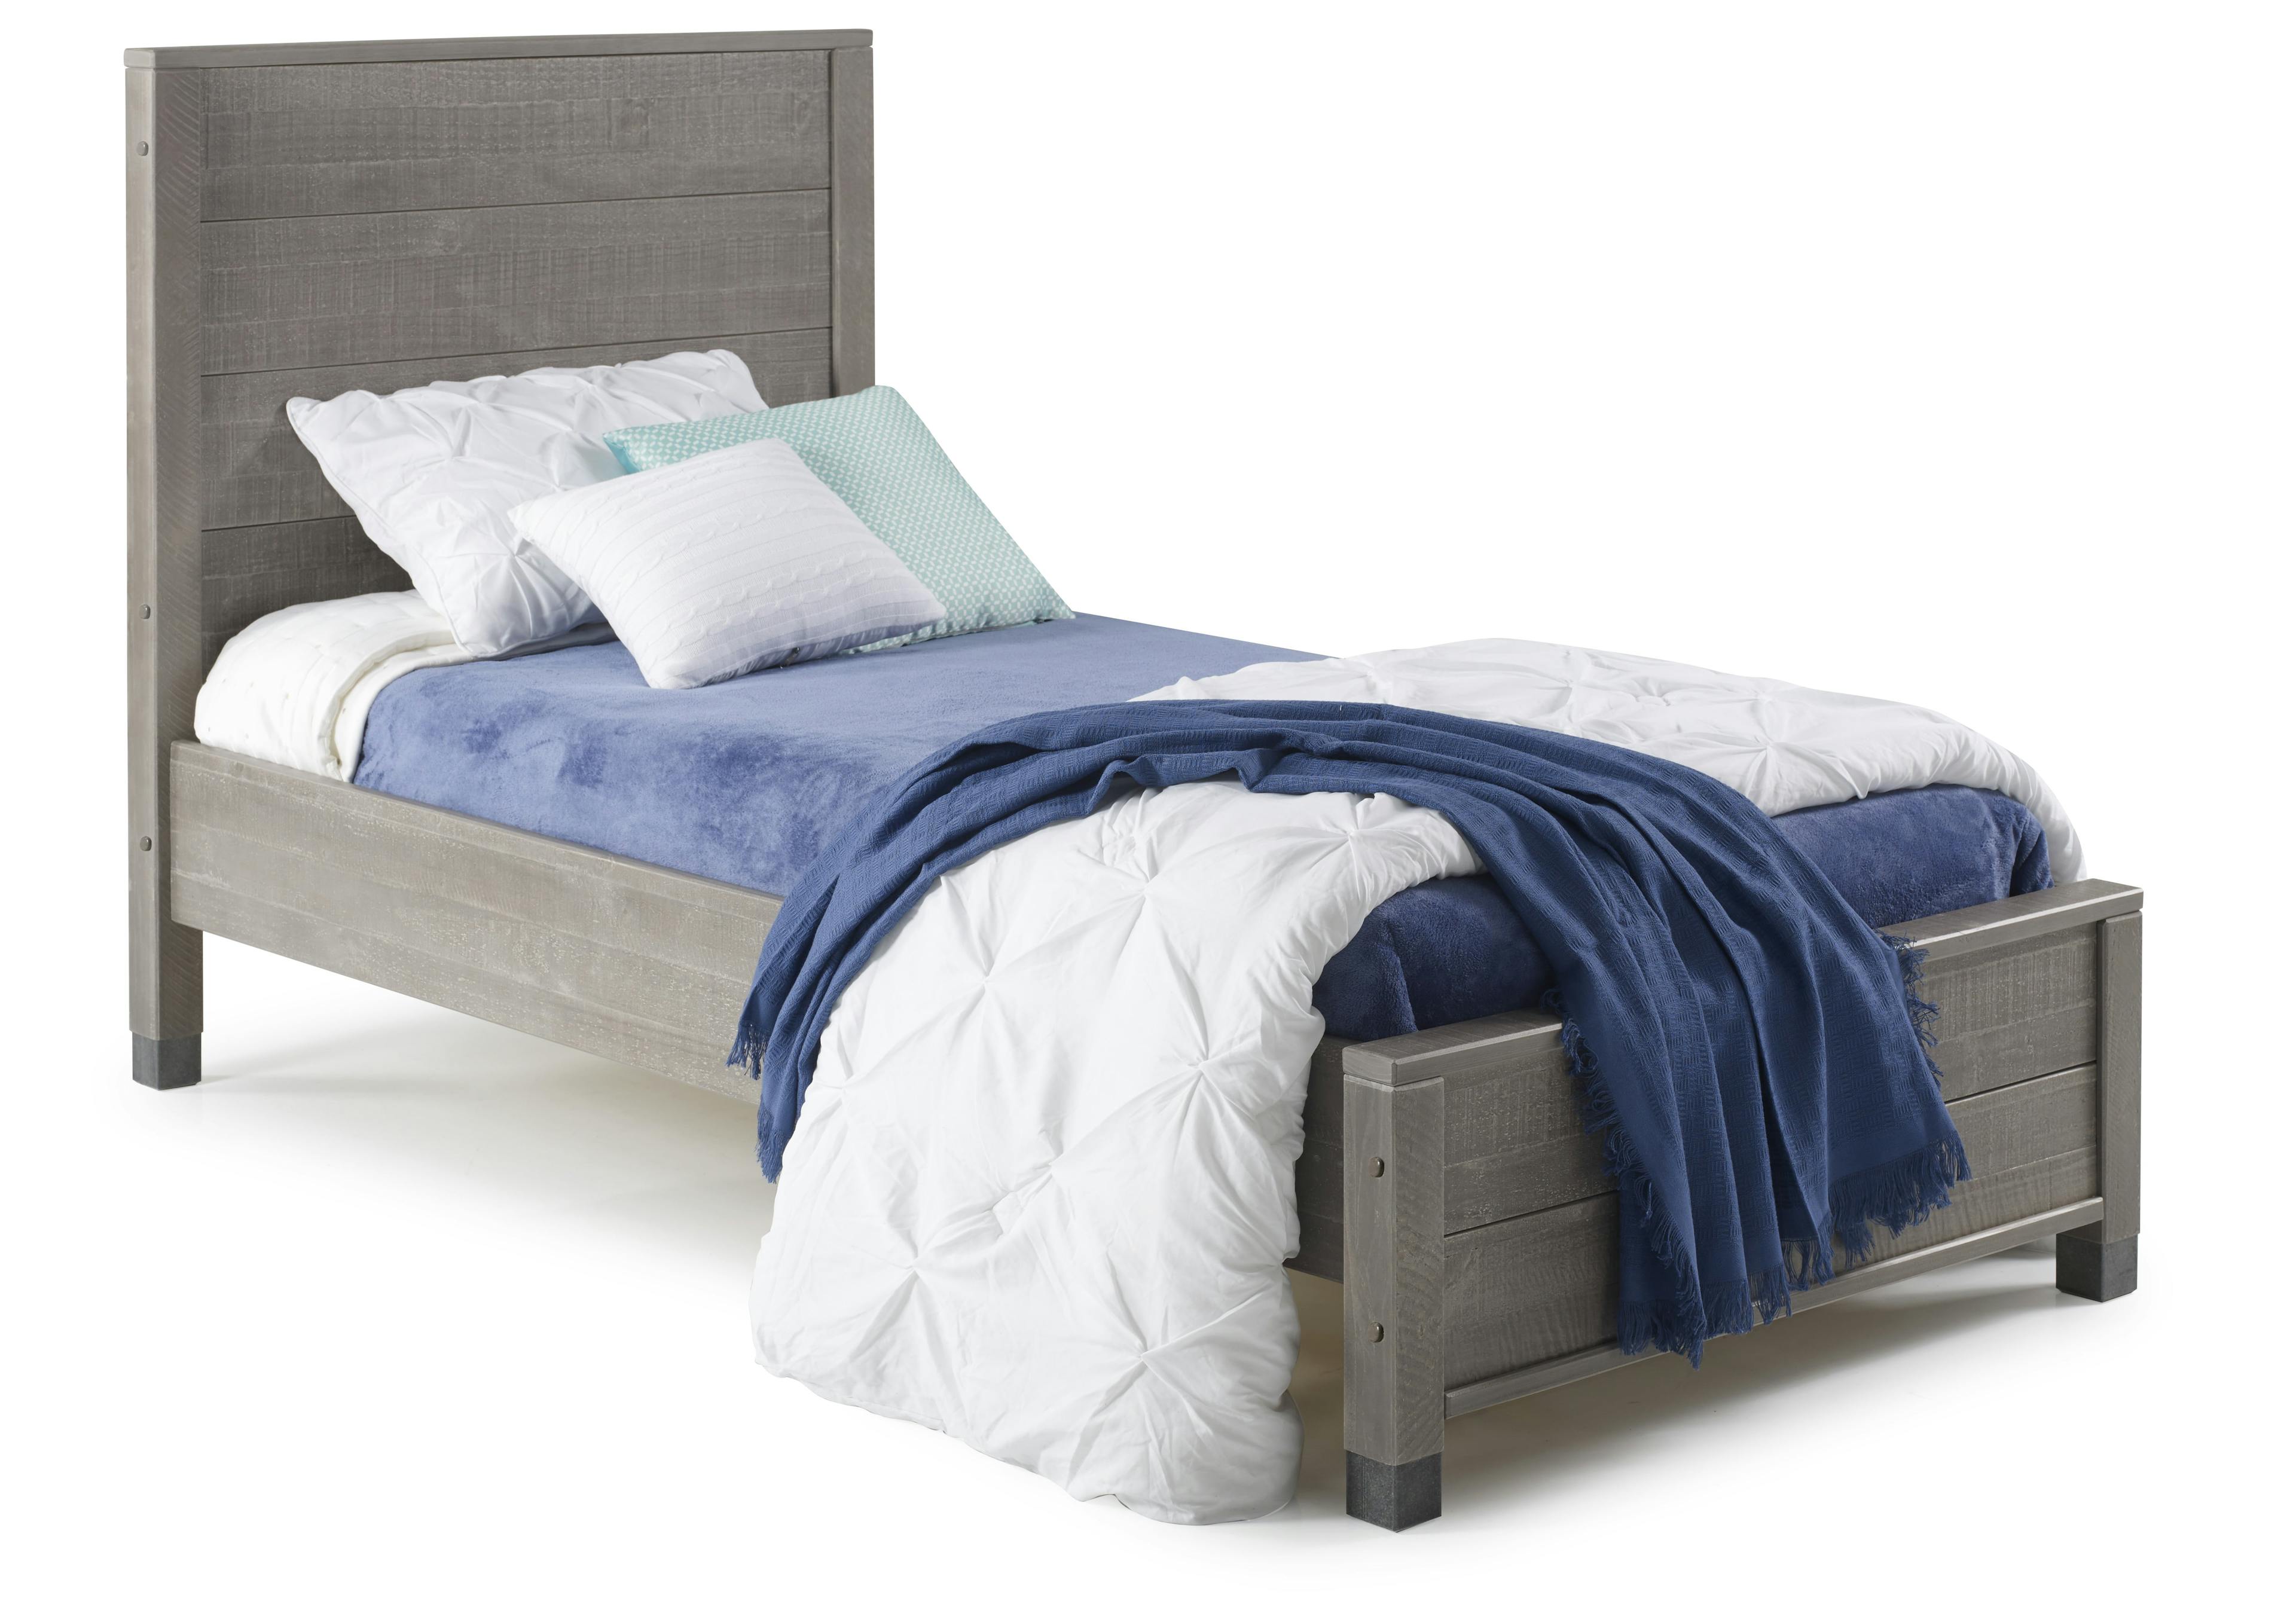 Driftwood Gray Solid Pine Twin Platform Bed with Wood Headboard